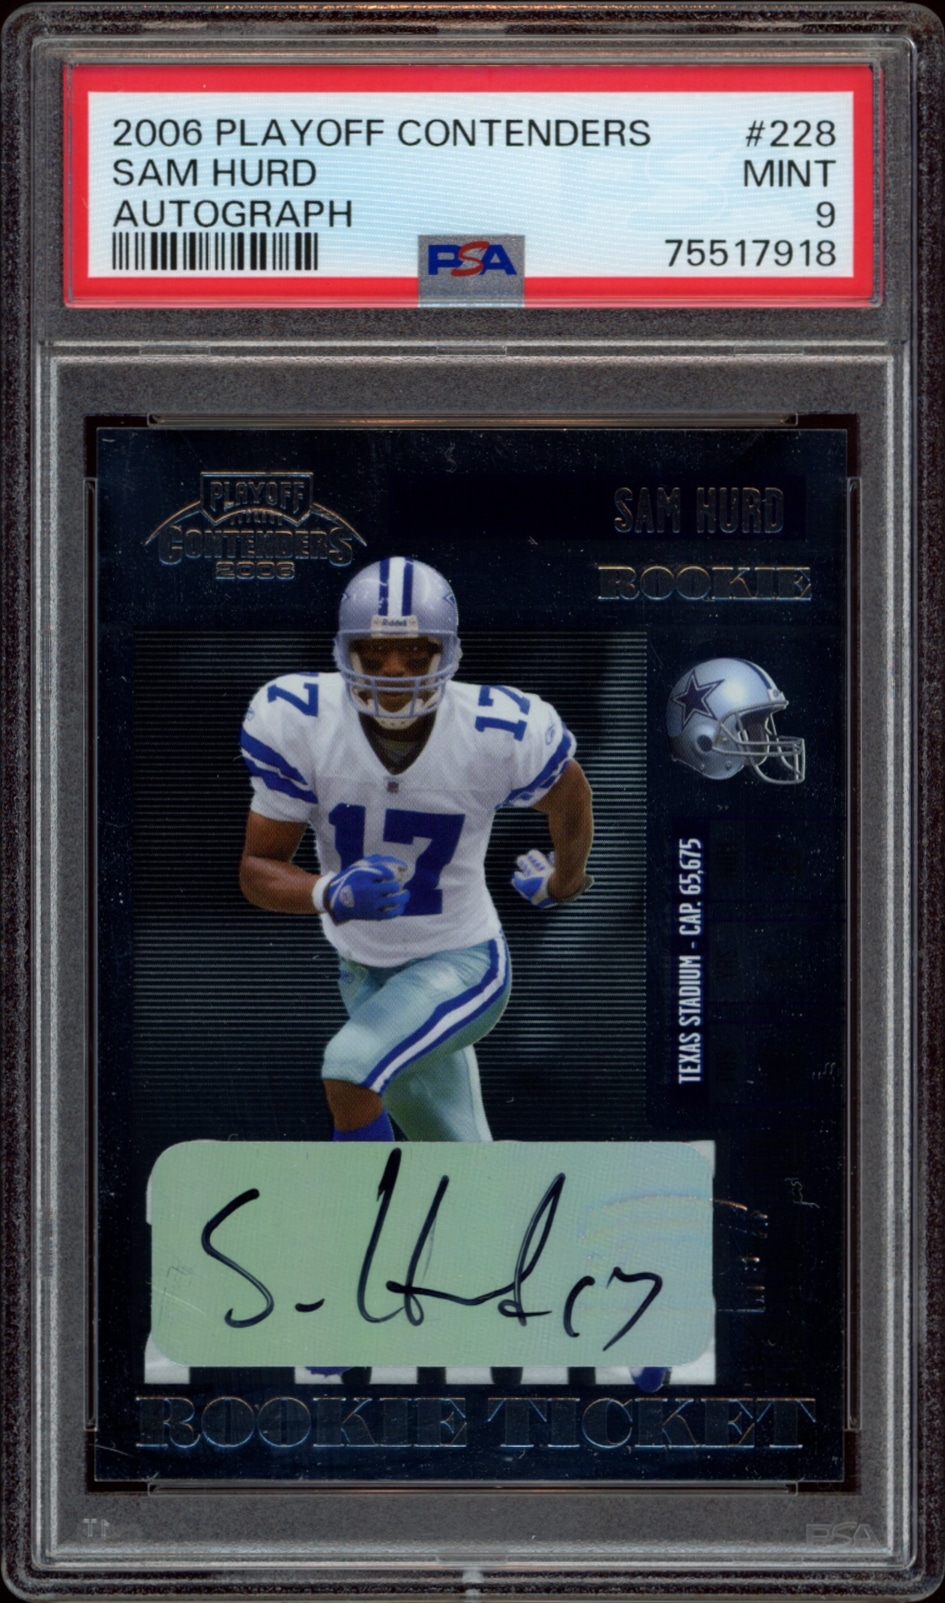 Sam Hurd on 2006 Playoff Contenders autographed card, rated PSA 9.